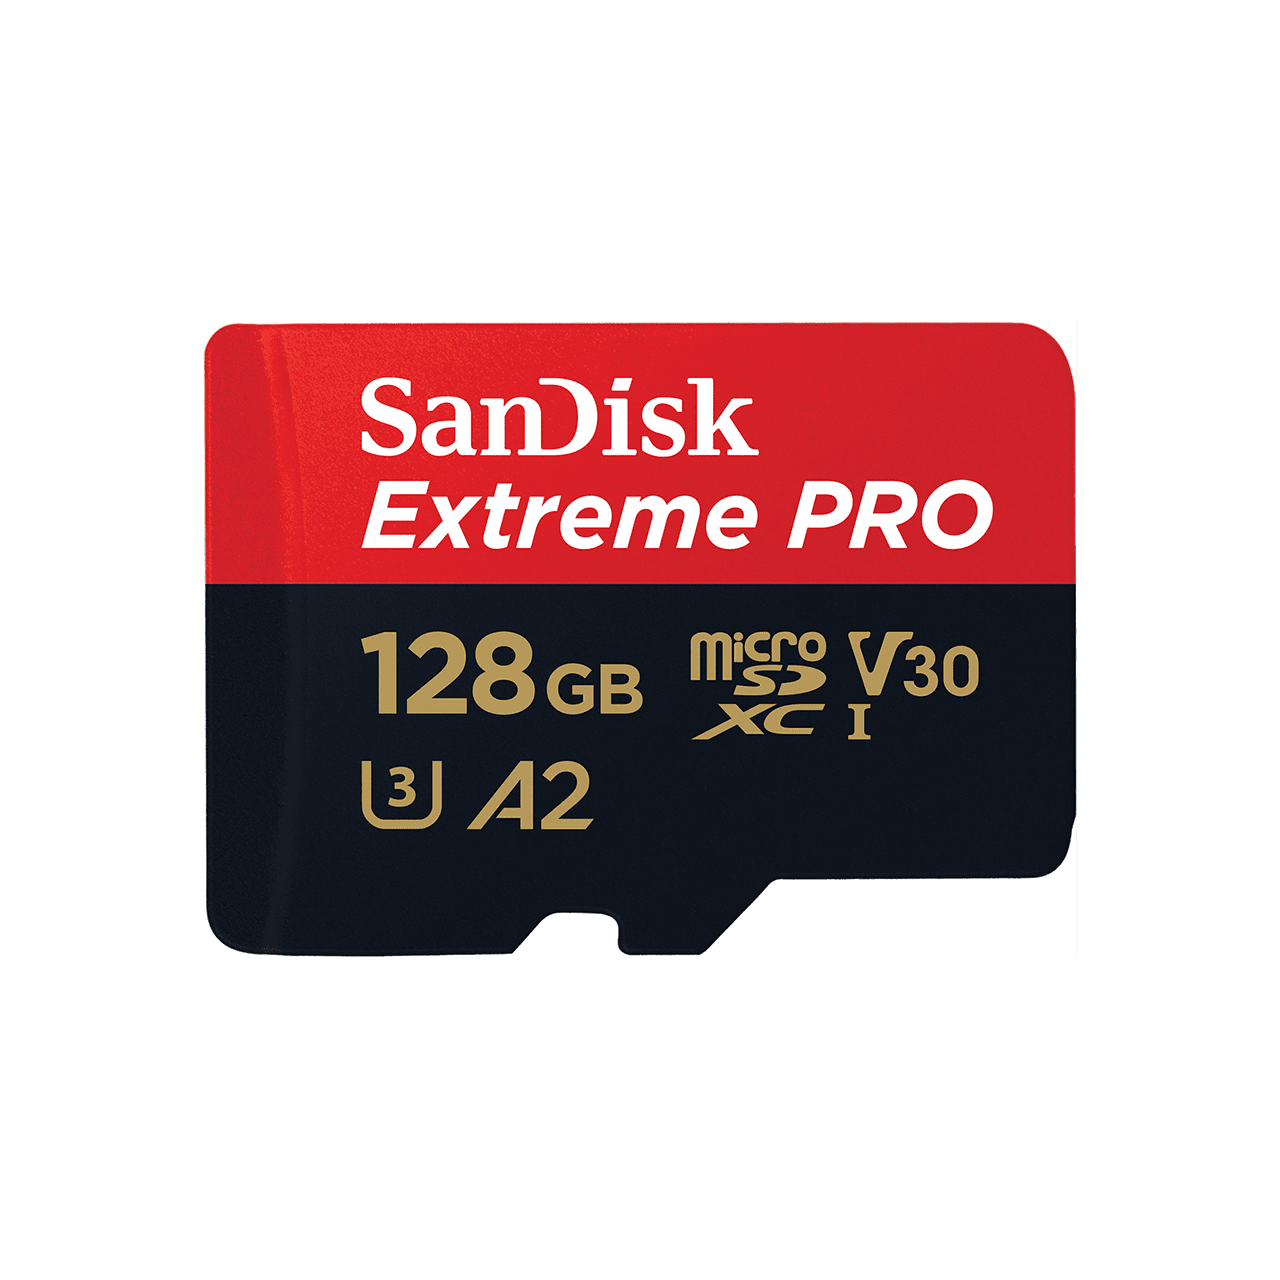 SanDisk Extreme Micro SD card, 128GB with SD Adapter